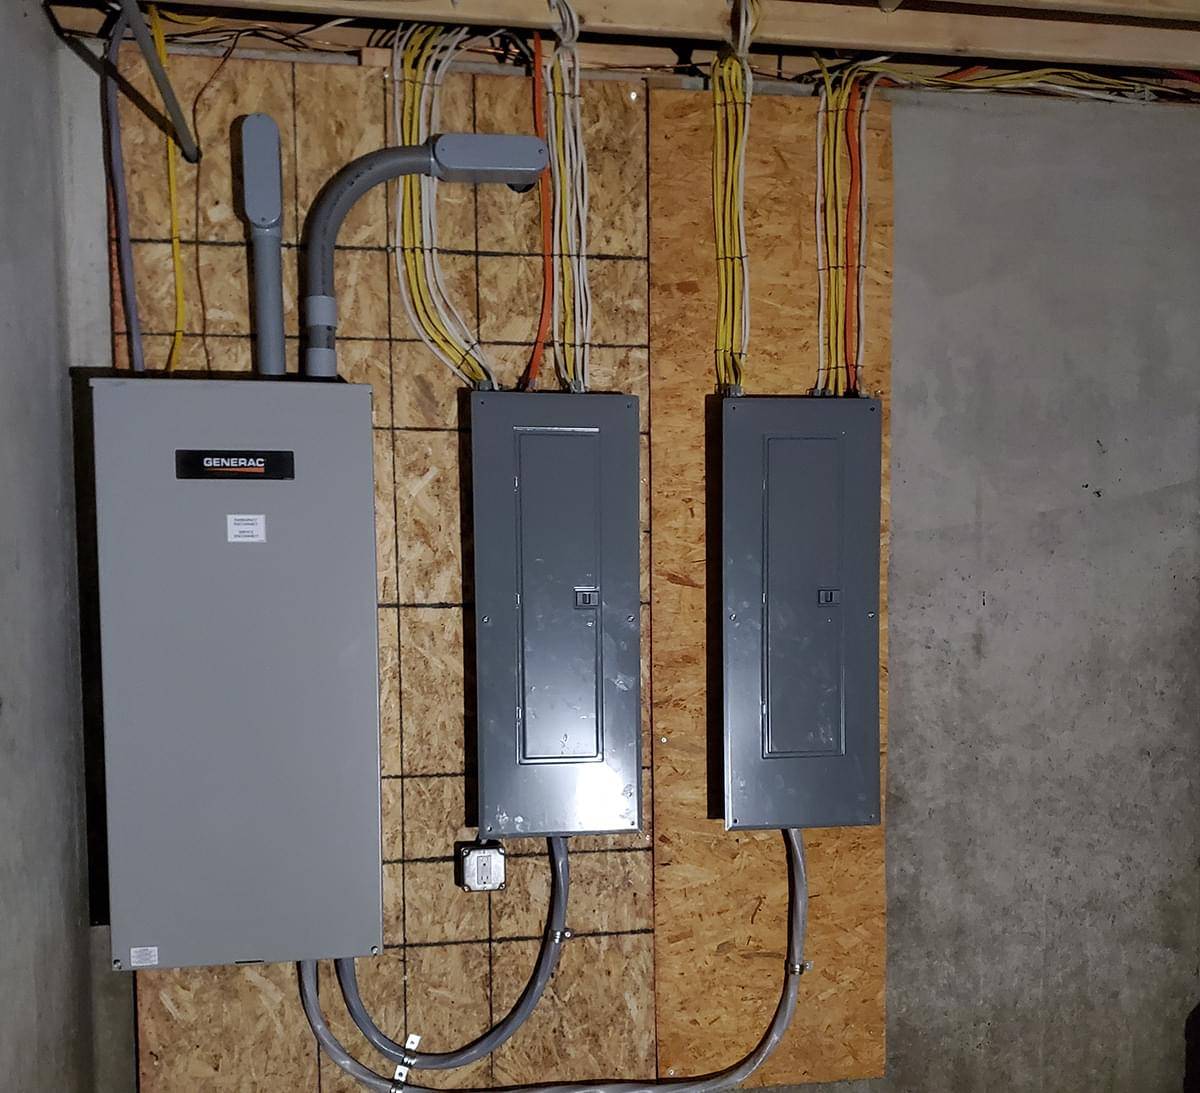 a newly installed generac generator panel next to two electric panels